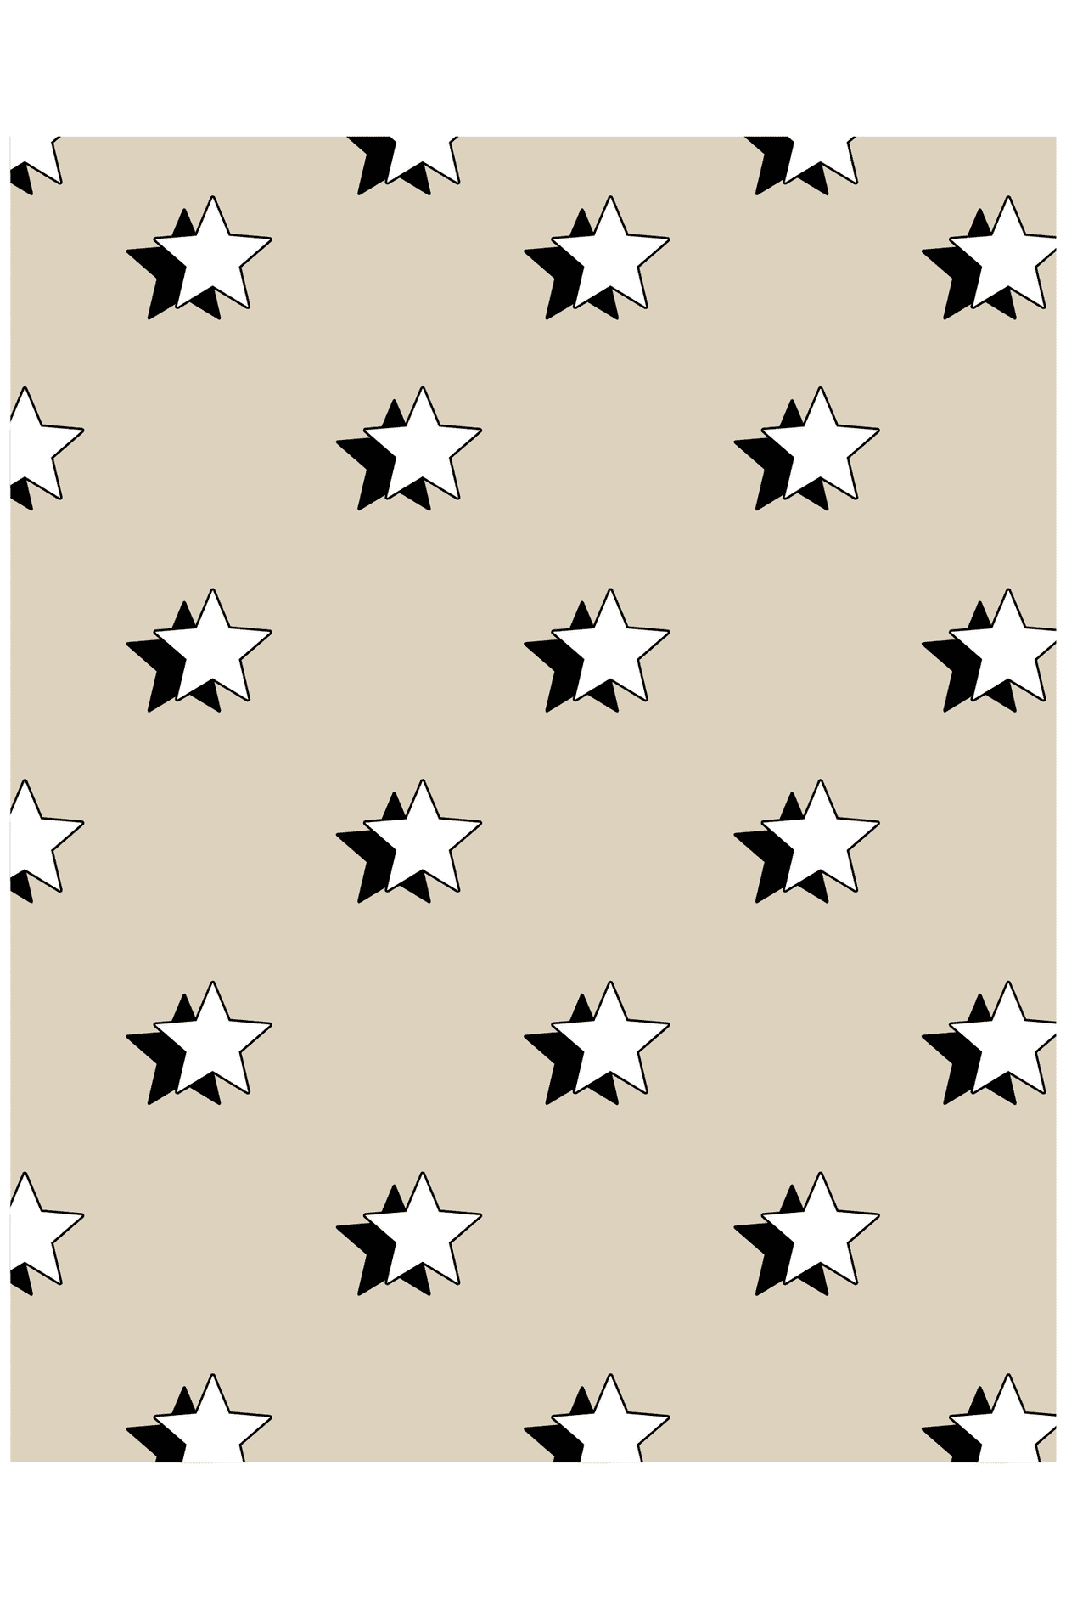 STARS POSTER IN MULTIPLE COLORS - PosterFi